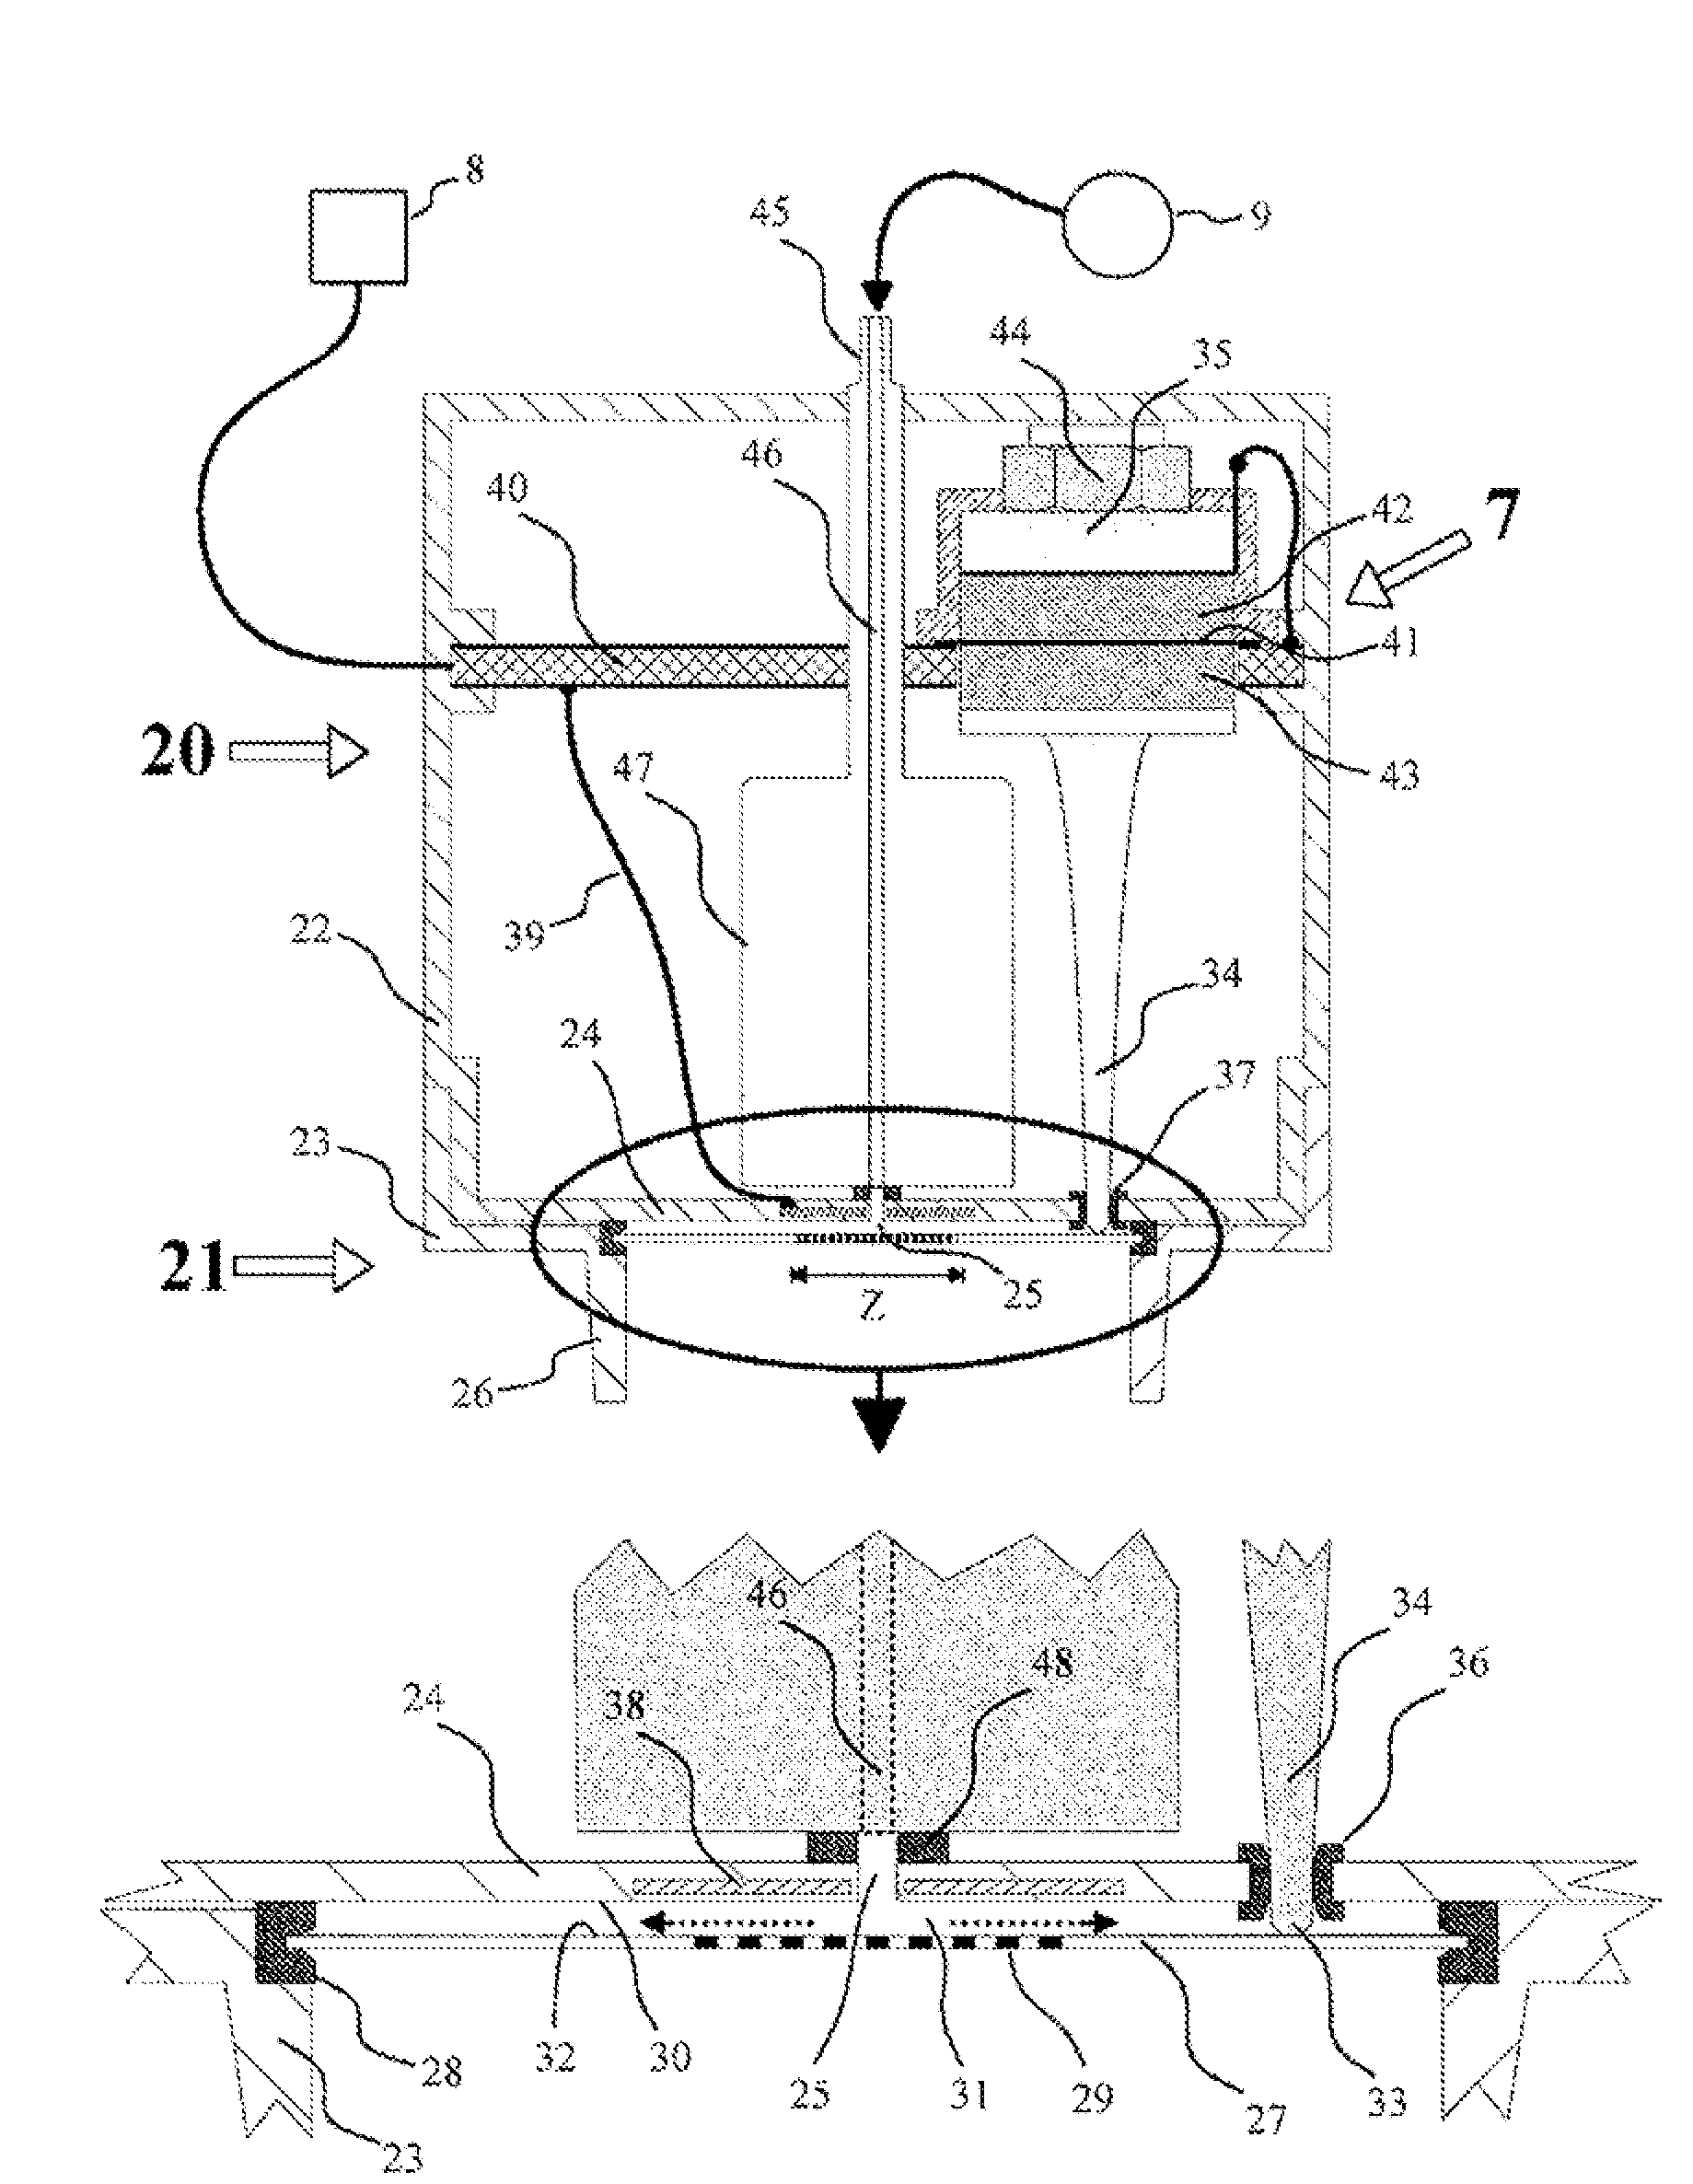 Apparatus, system and method for administering an anesthetic agent for a subject breathing